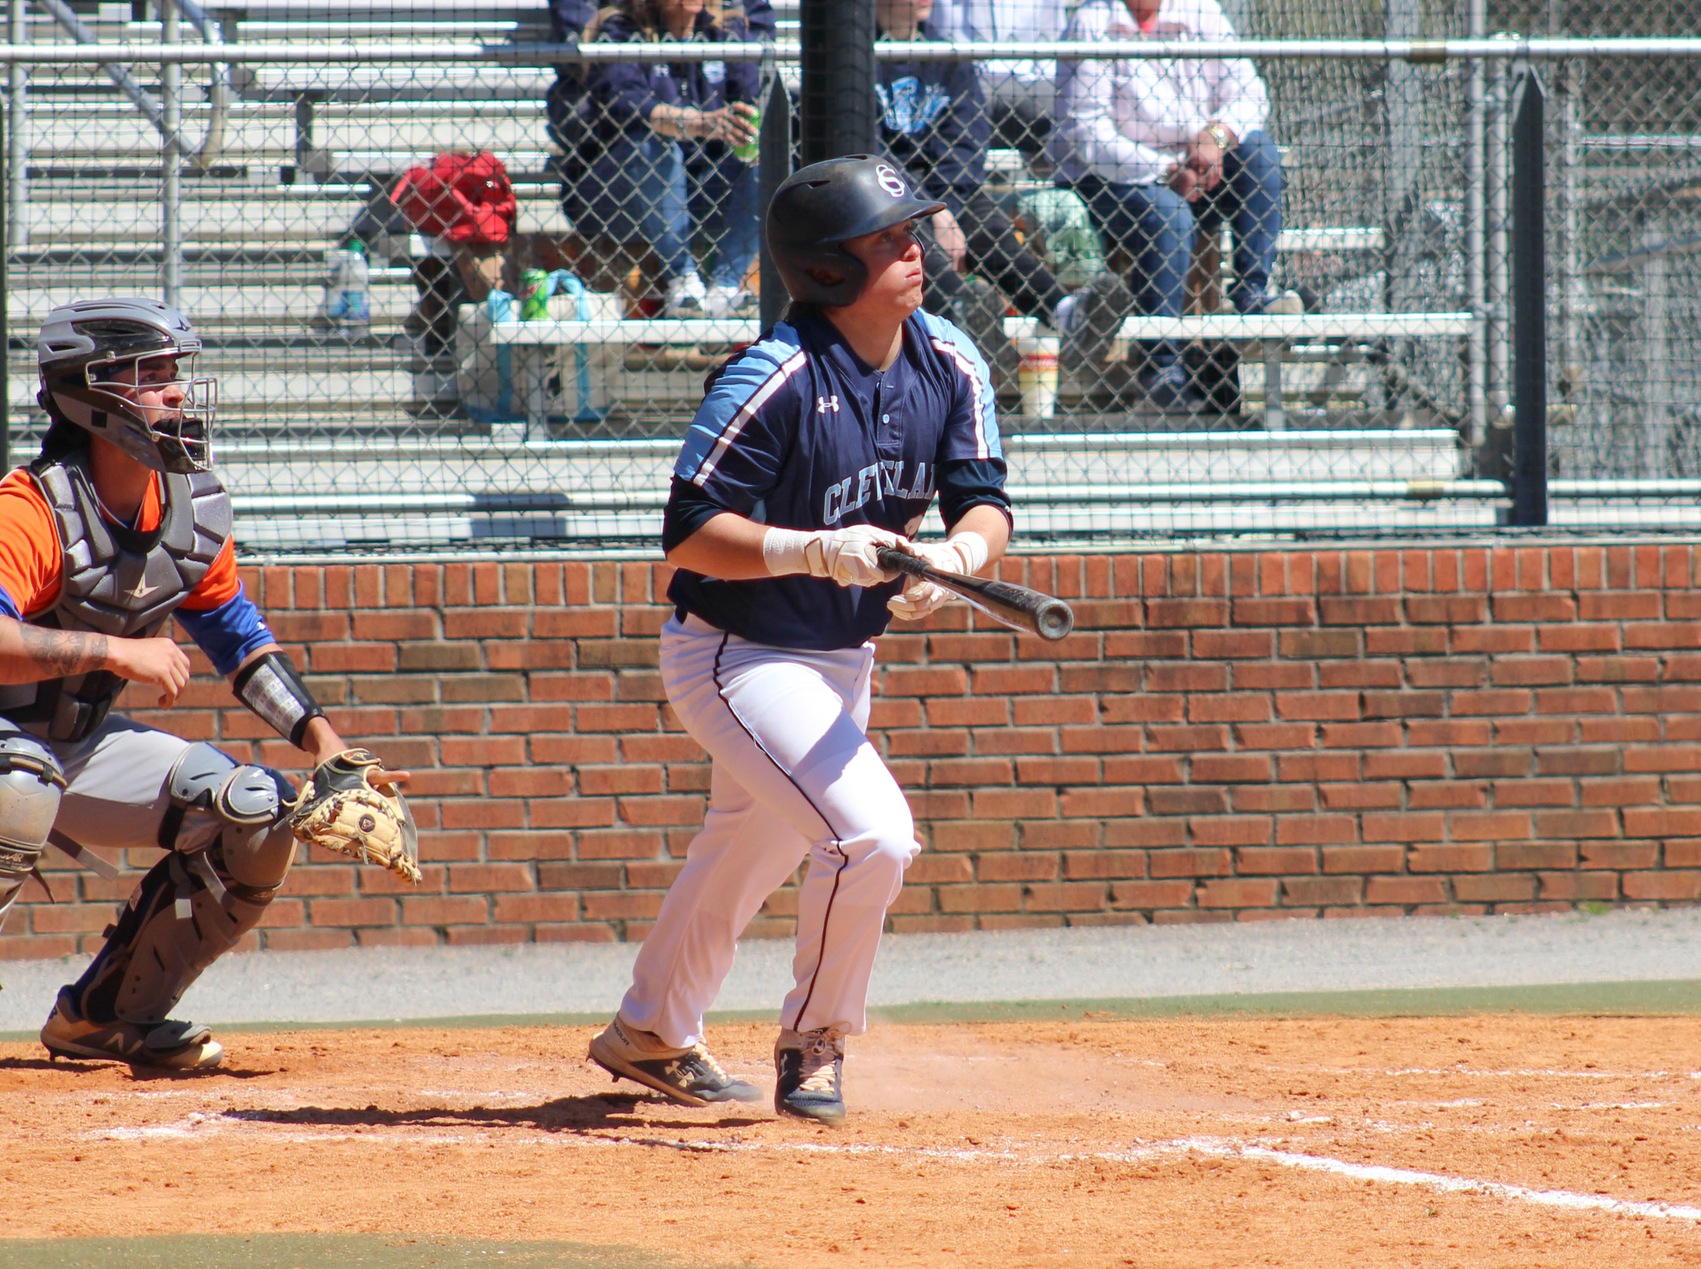 Cougars Walk Off, Win Series vs. Chattanooga State